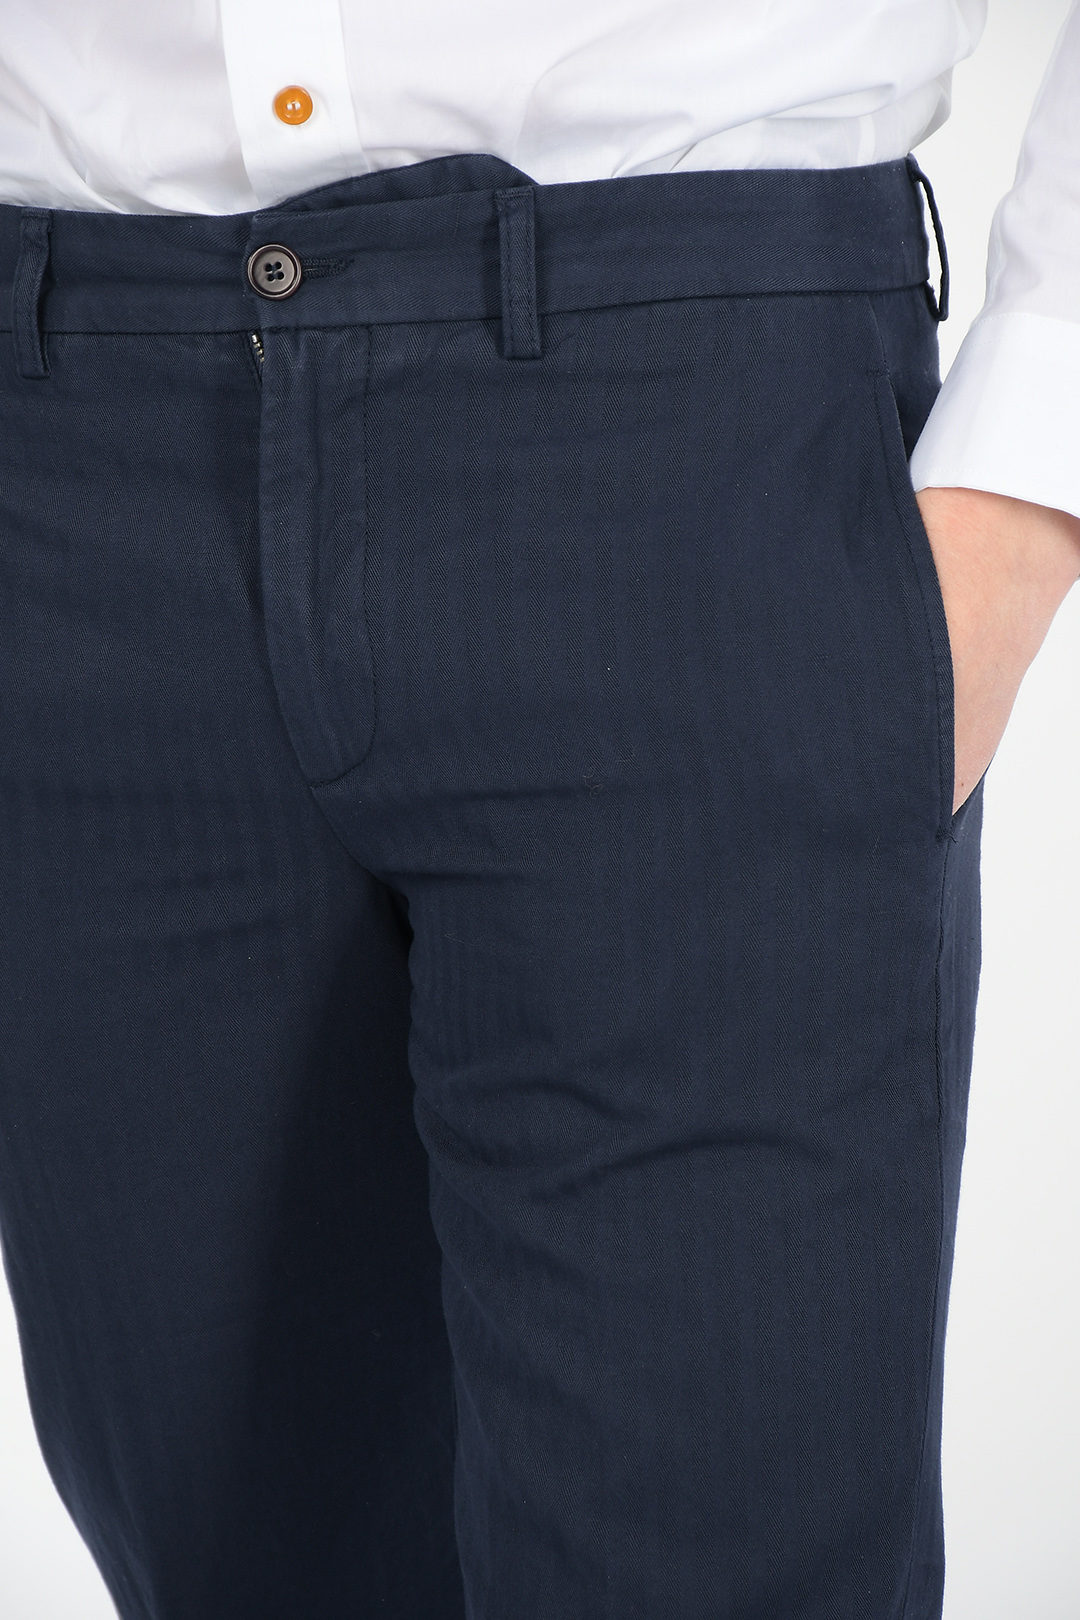 Aspesi Cotton and Linen DOVER Stright Fit Pants with Jetted Pockets men ...